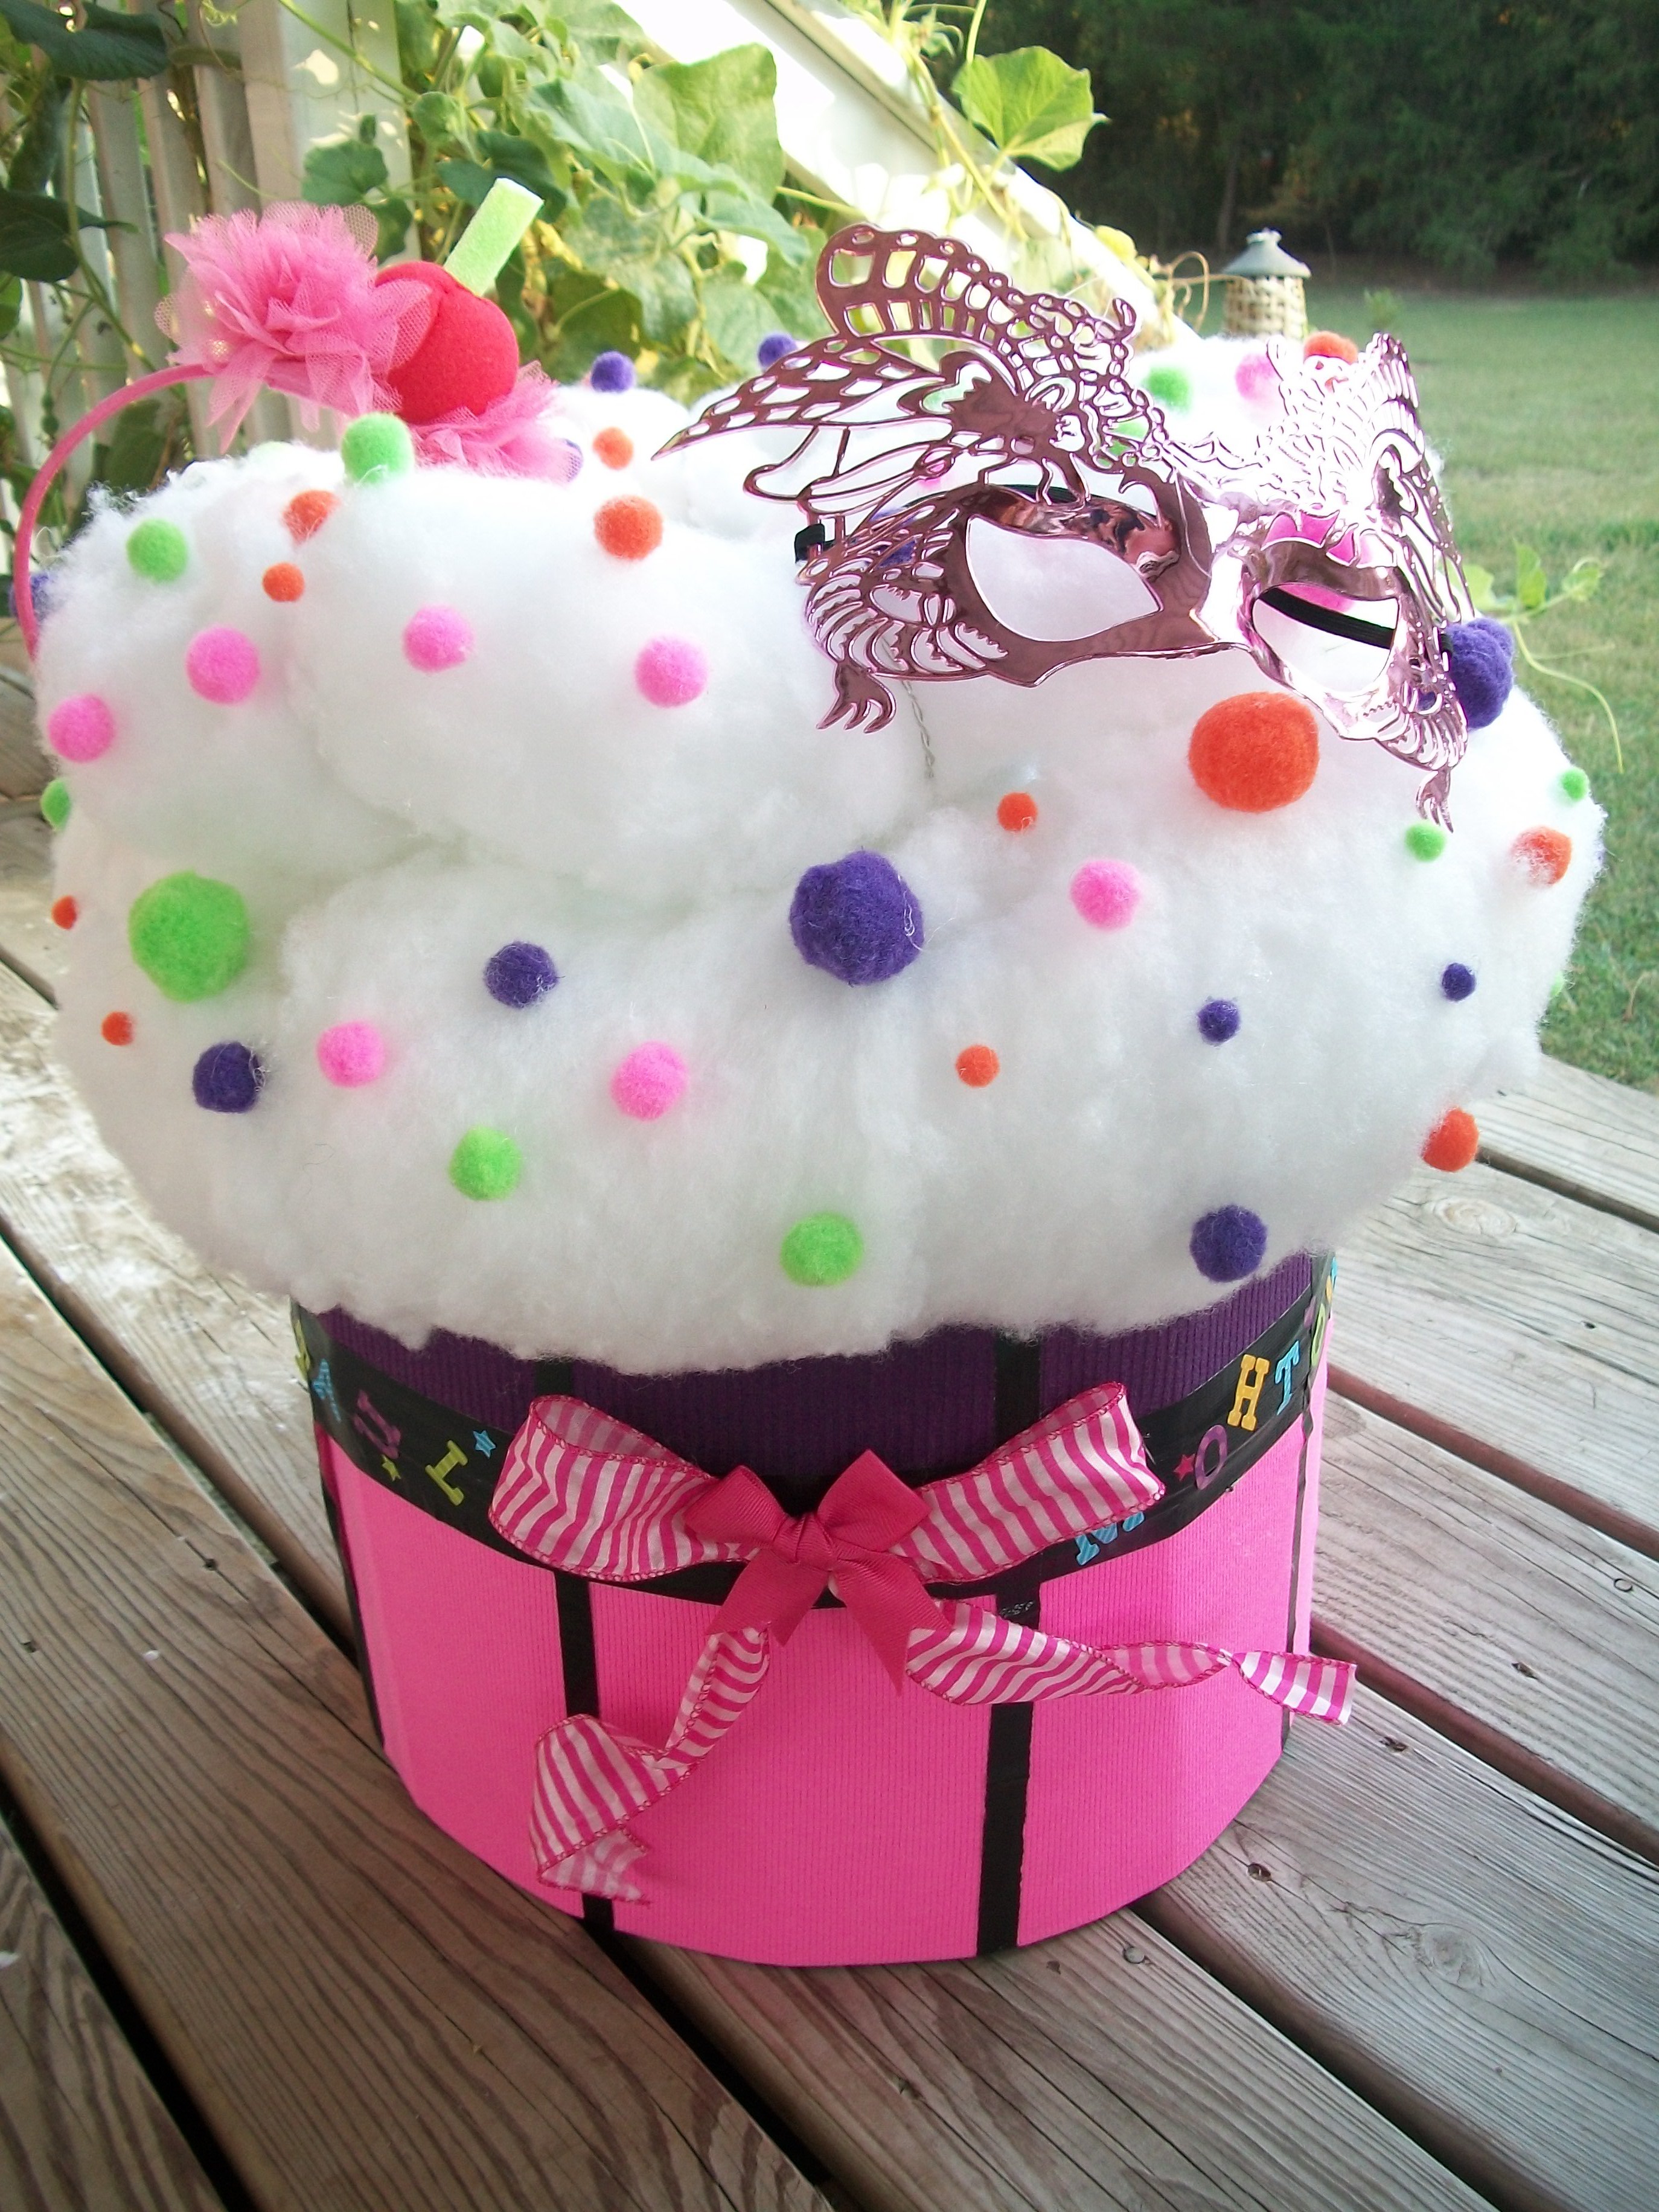 DIY Cupcake Halloween Costume for Toddler Girl with Battery Operated Lights and Sprinkles